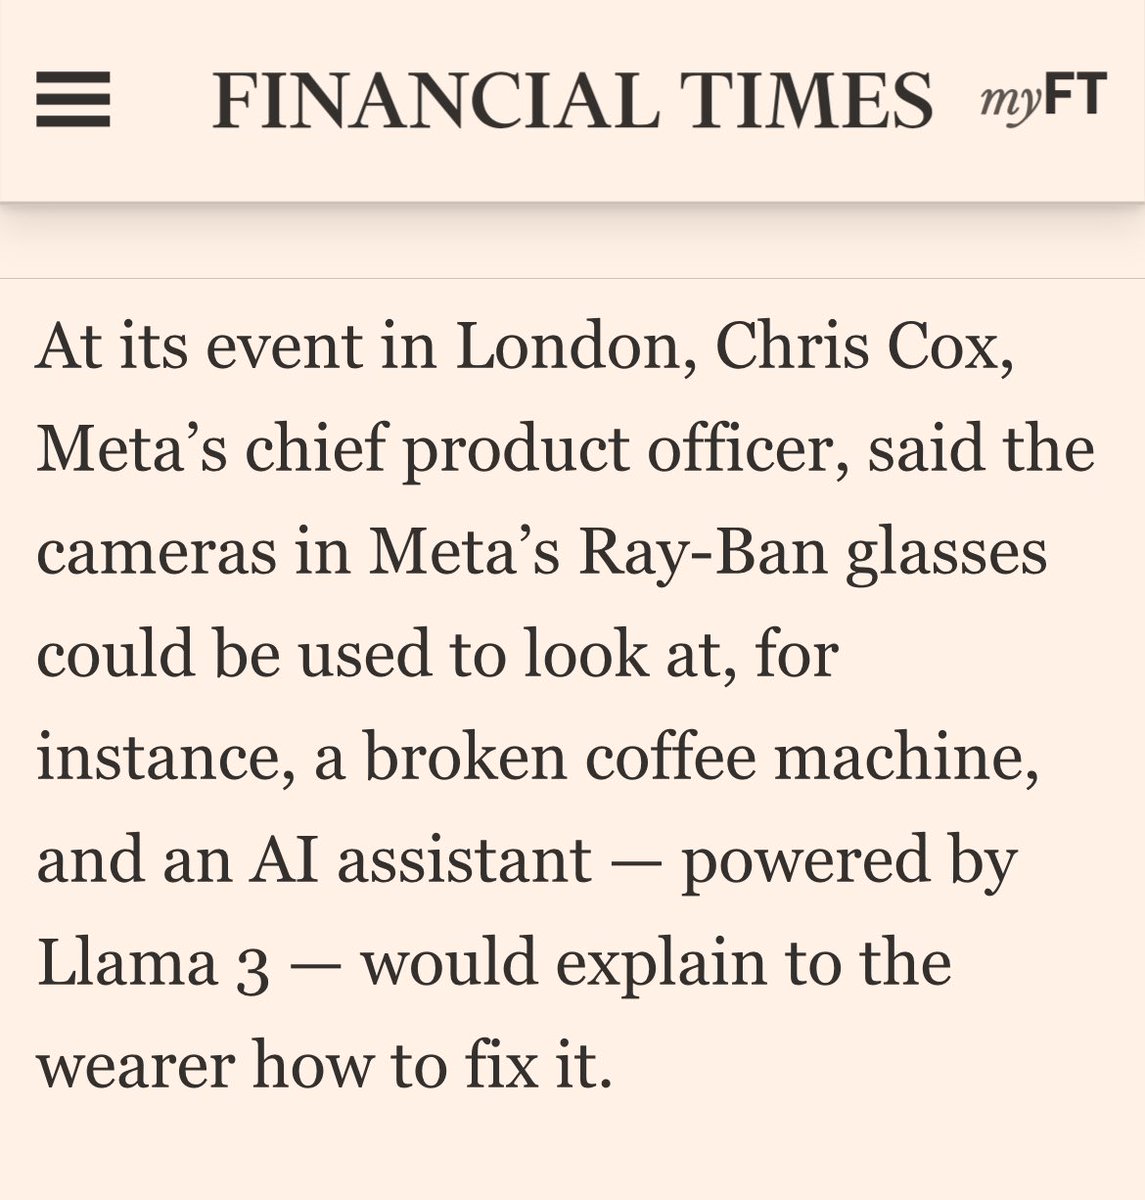 Wait. I’ve never met anyone preparing coffee wearing ray-ban glasses. 🕶️ My moka pot has not broken once since I bought it twenty years ago. ☕️ AI is doomed